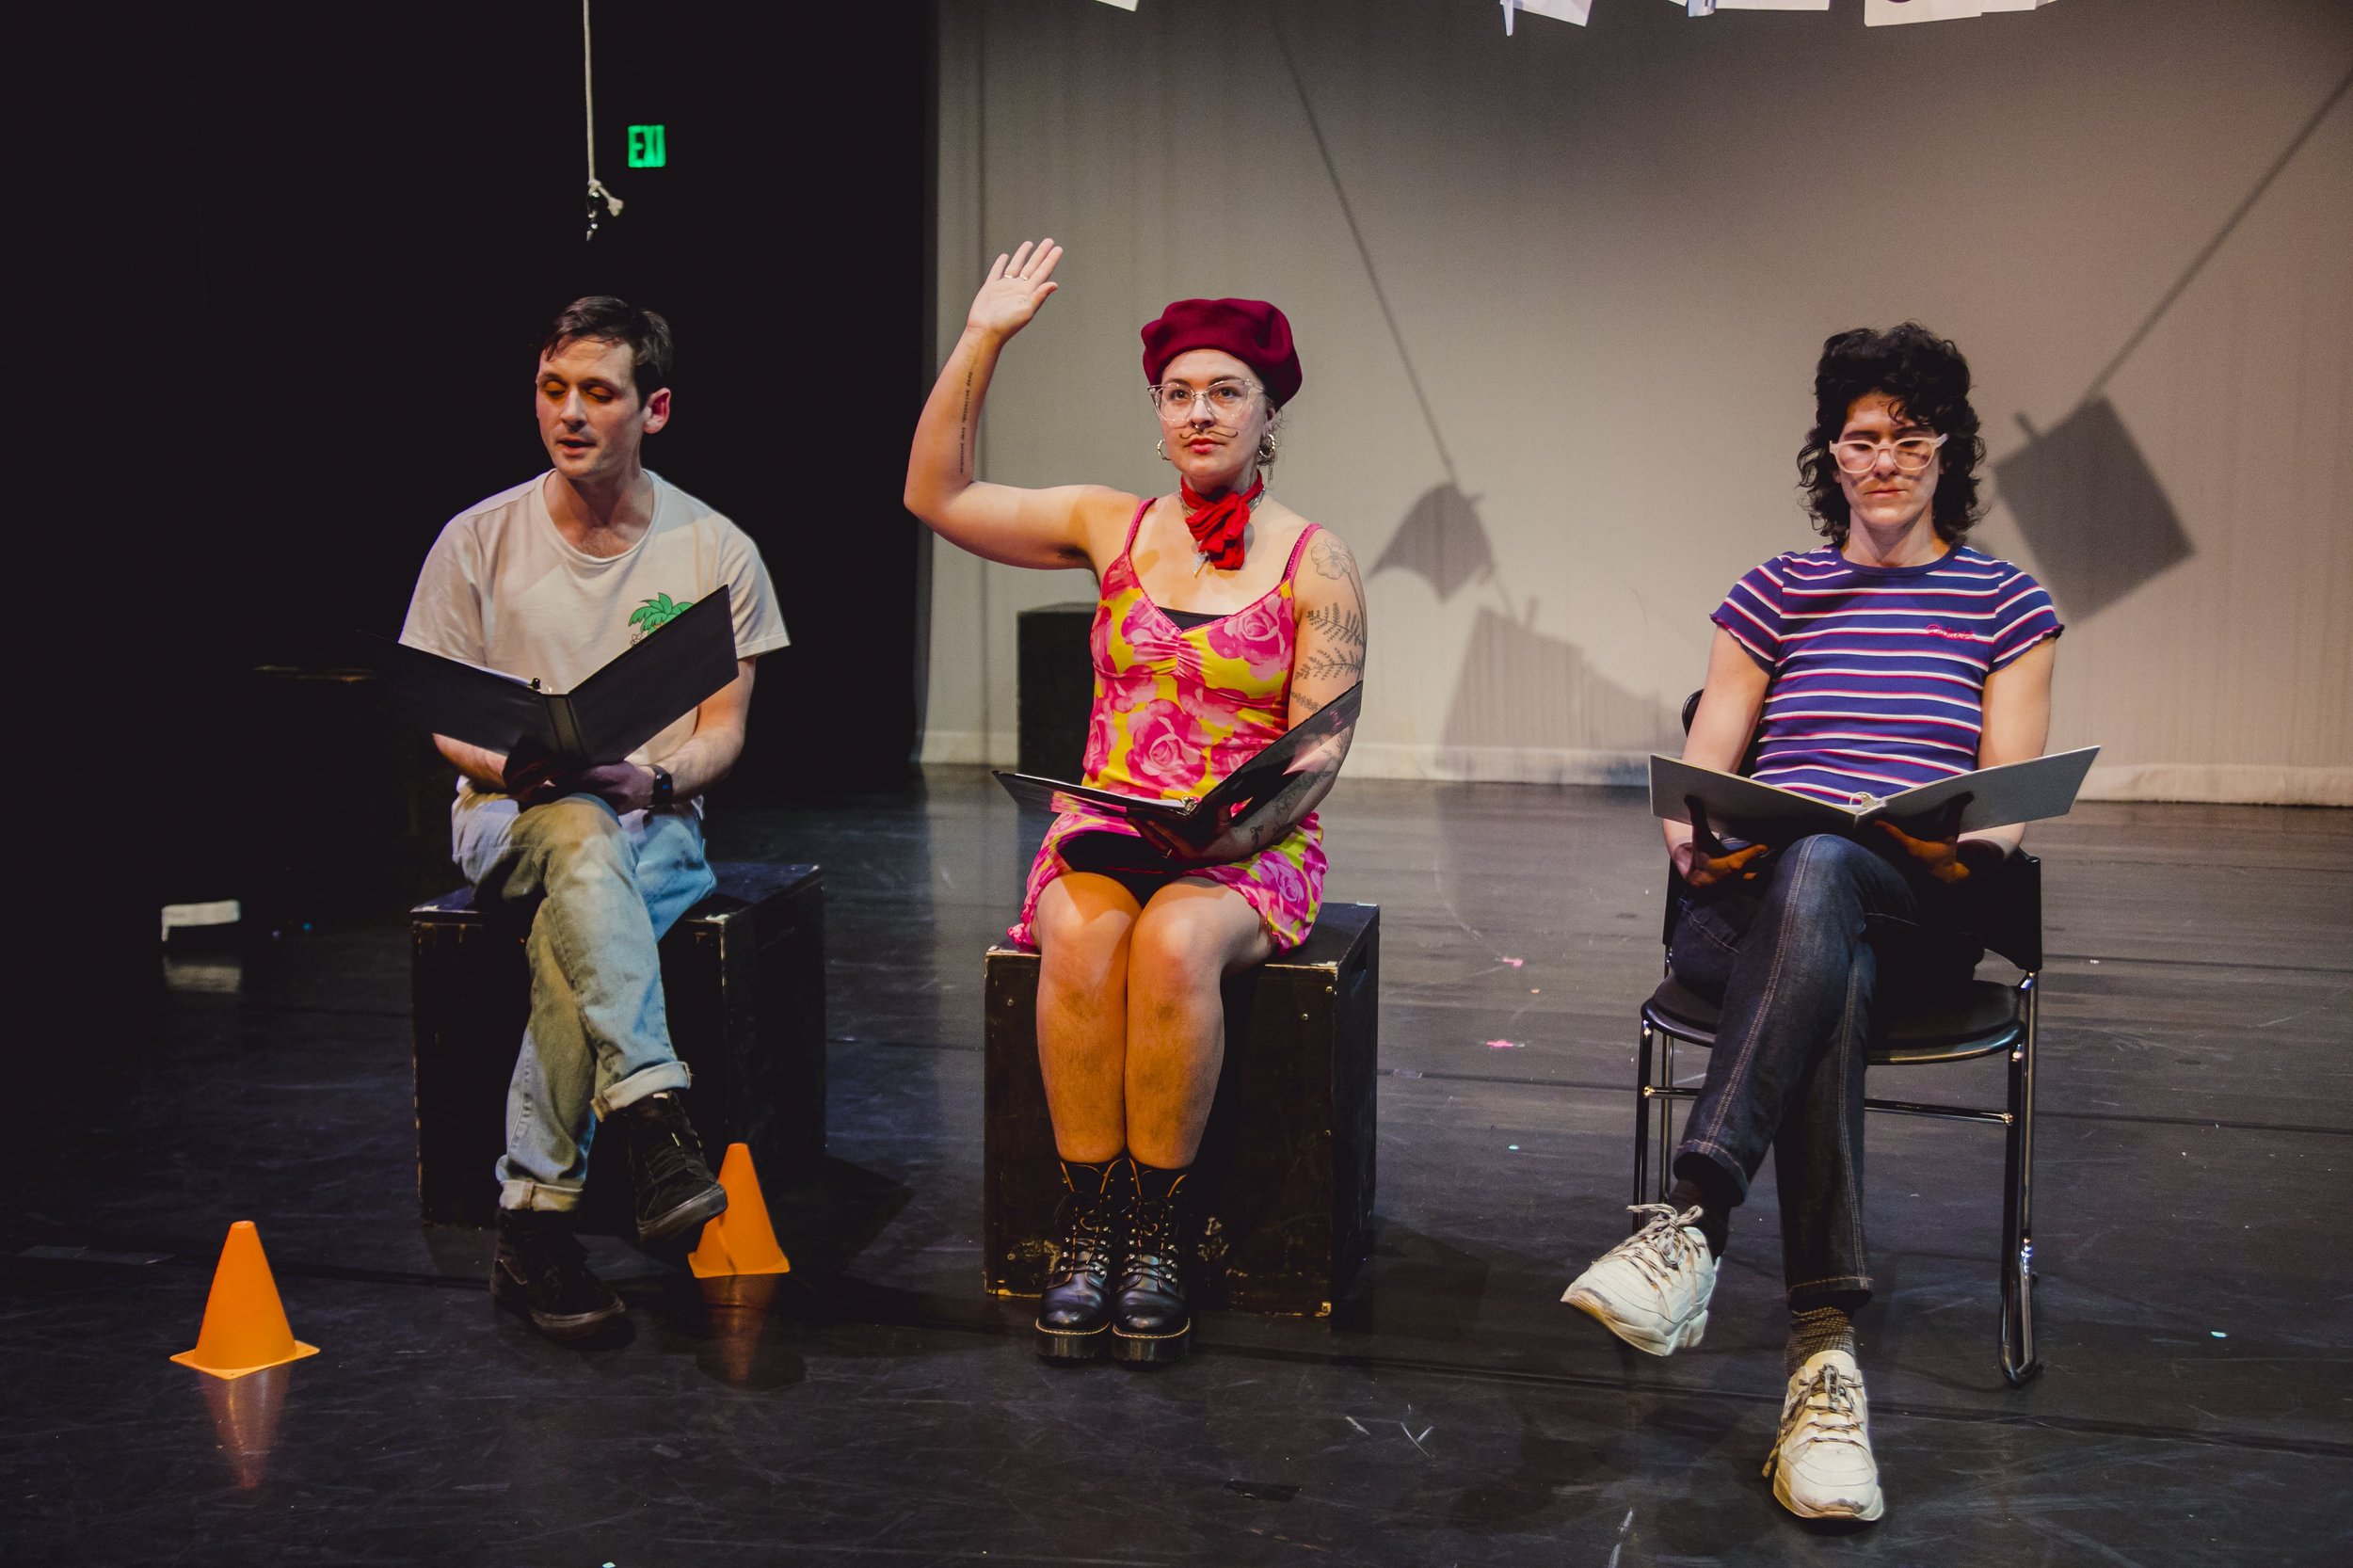 Sam Bertken, Andie Patterson, and Geulah Finman in "And now, premiering for the first time this weekend, the future of art, of theatre, of Neo-Futurism..."